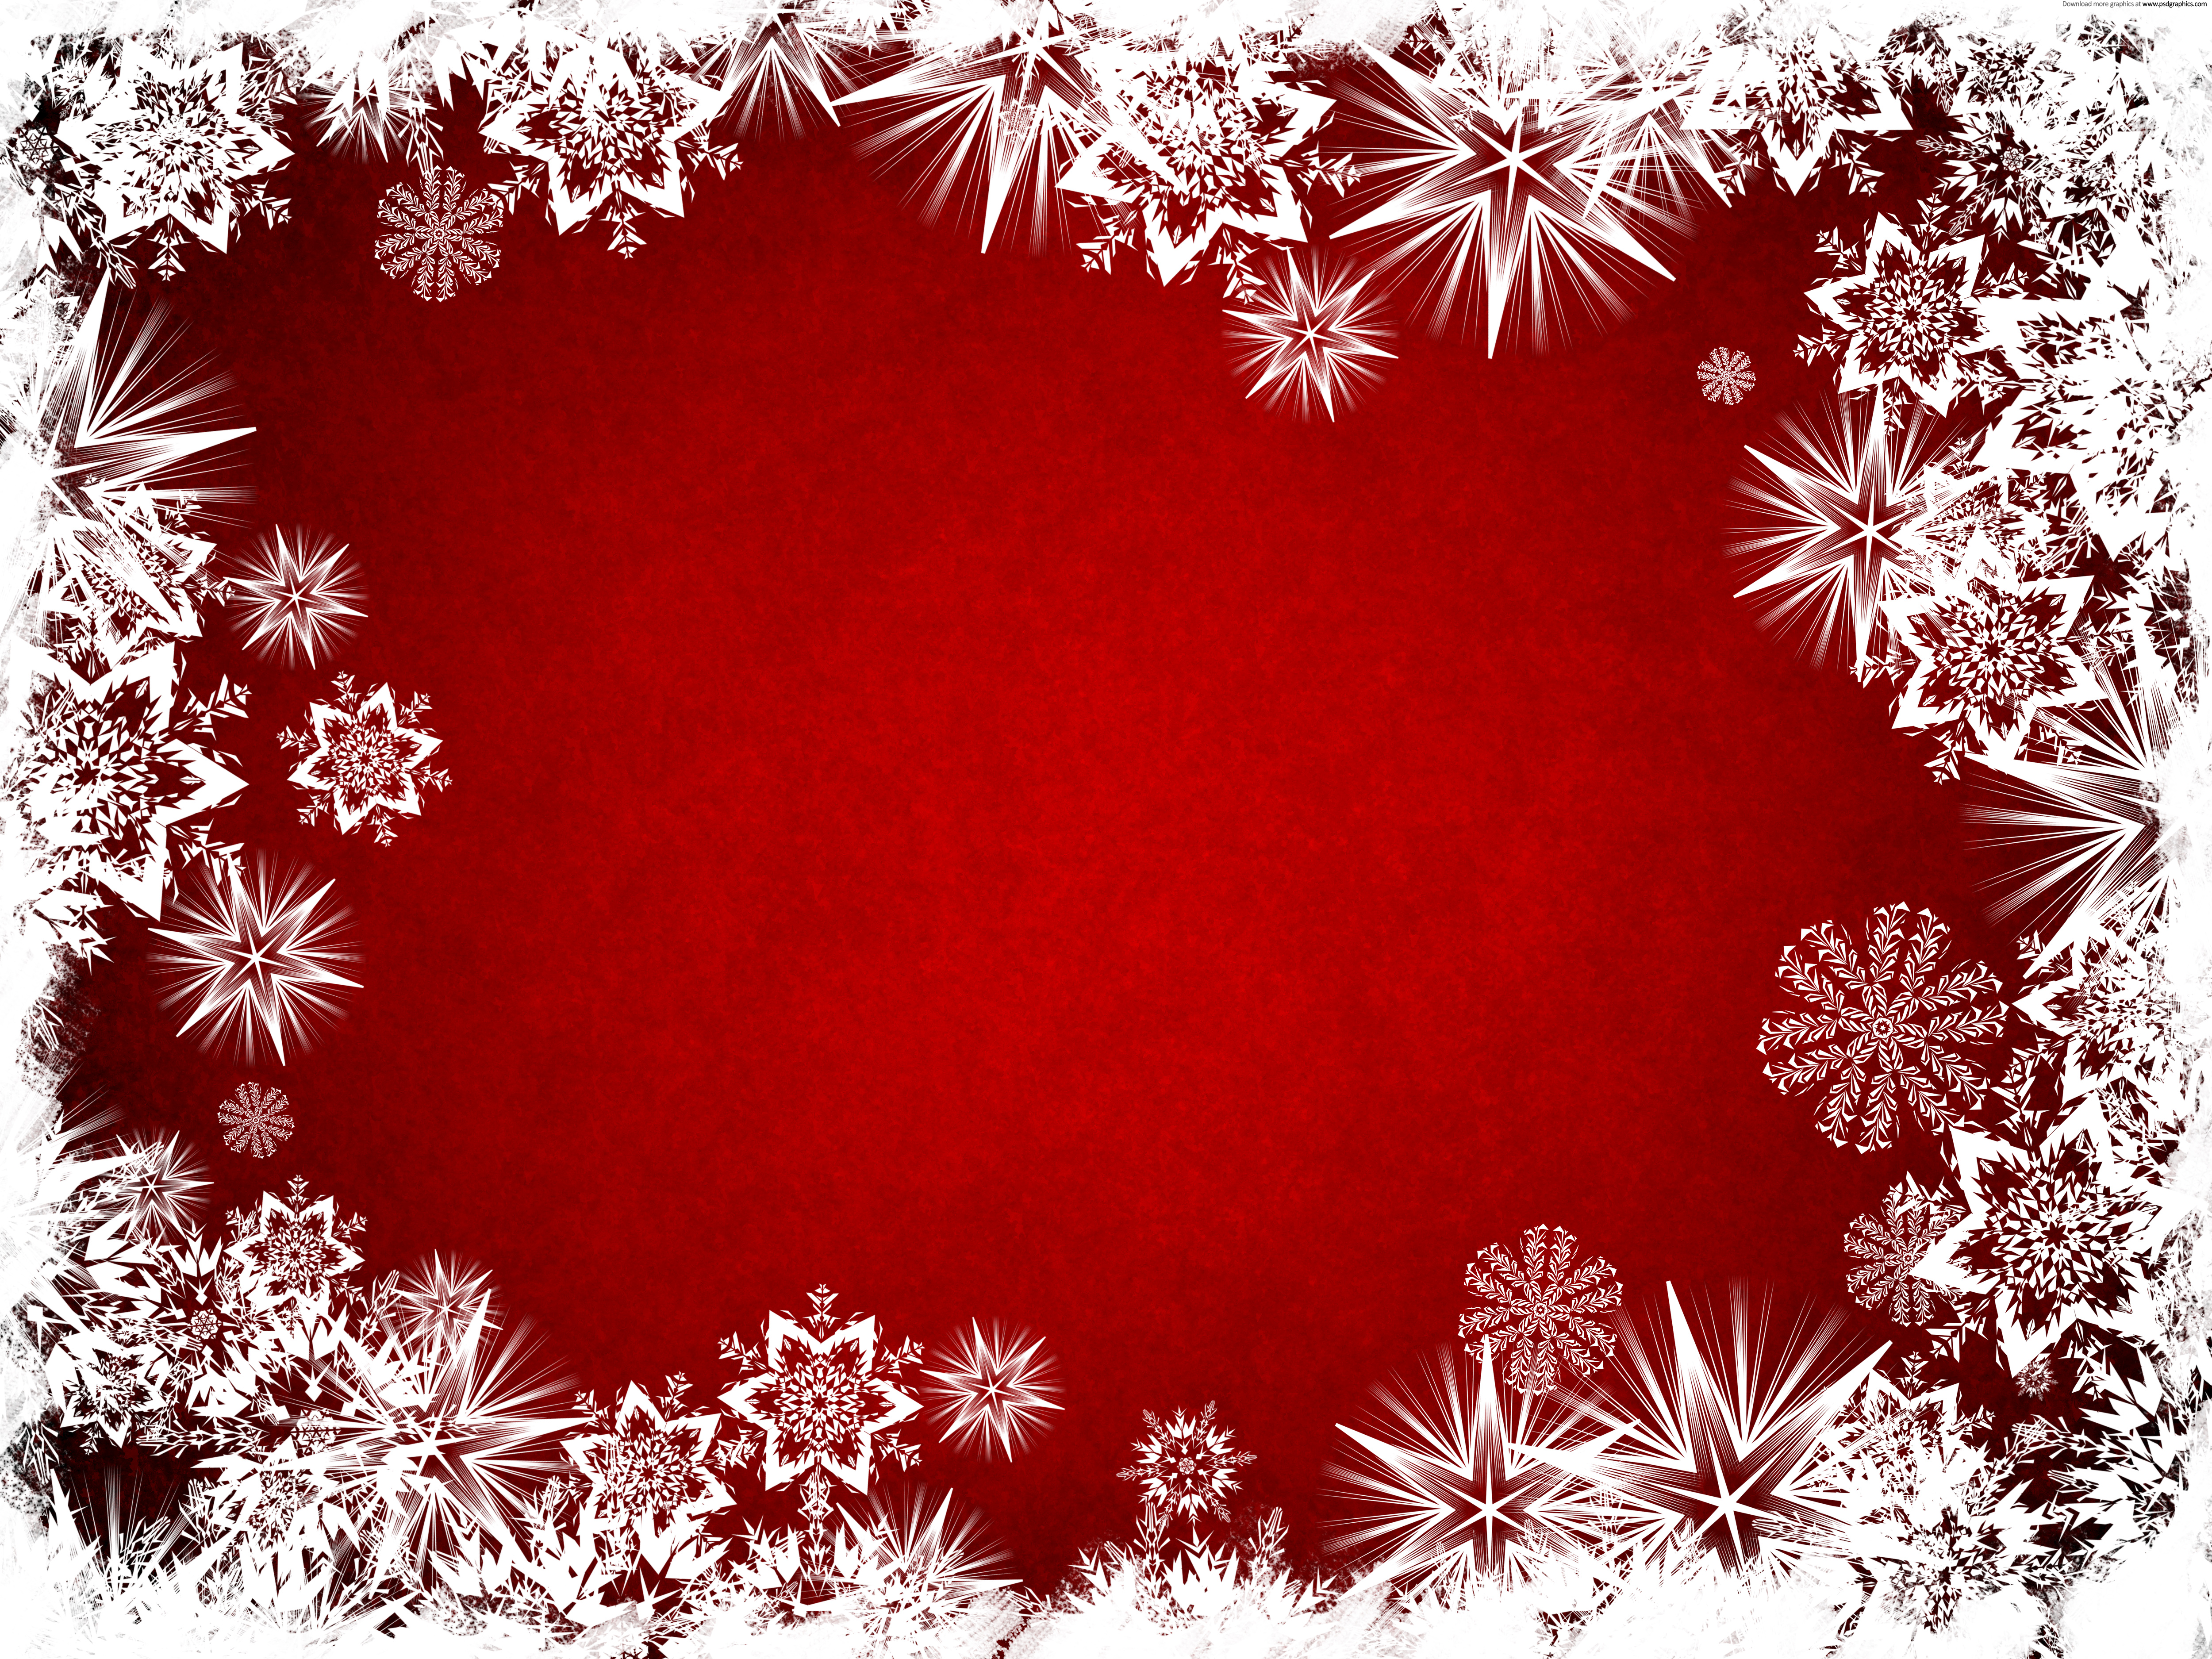 Abstract Christmas Background   Psdgraphics